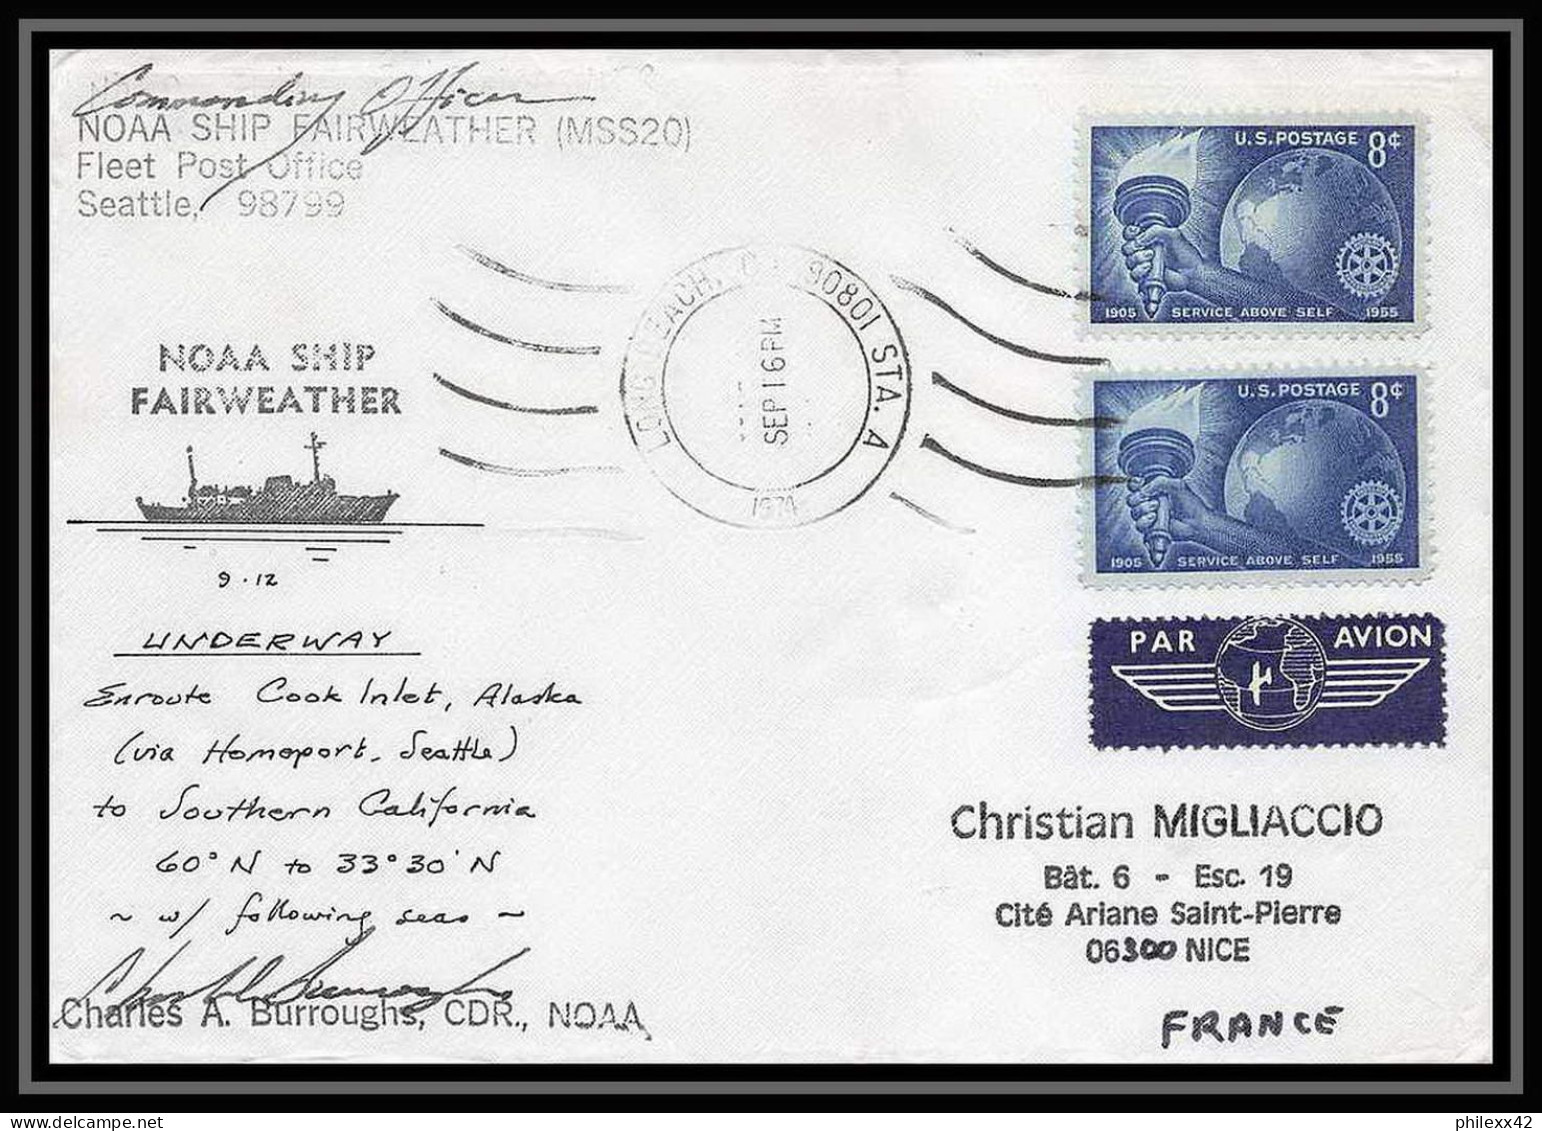 1972 Antarctic USA Lettre (cover) Noaa Ship Fairwether Signé Signed Rare 16/9/1974 Seattle - Scientific Stations & Arctic Drifting Stations